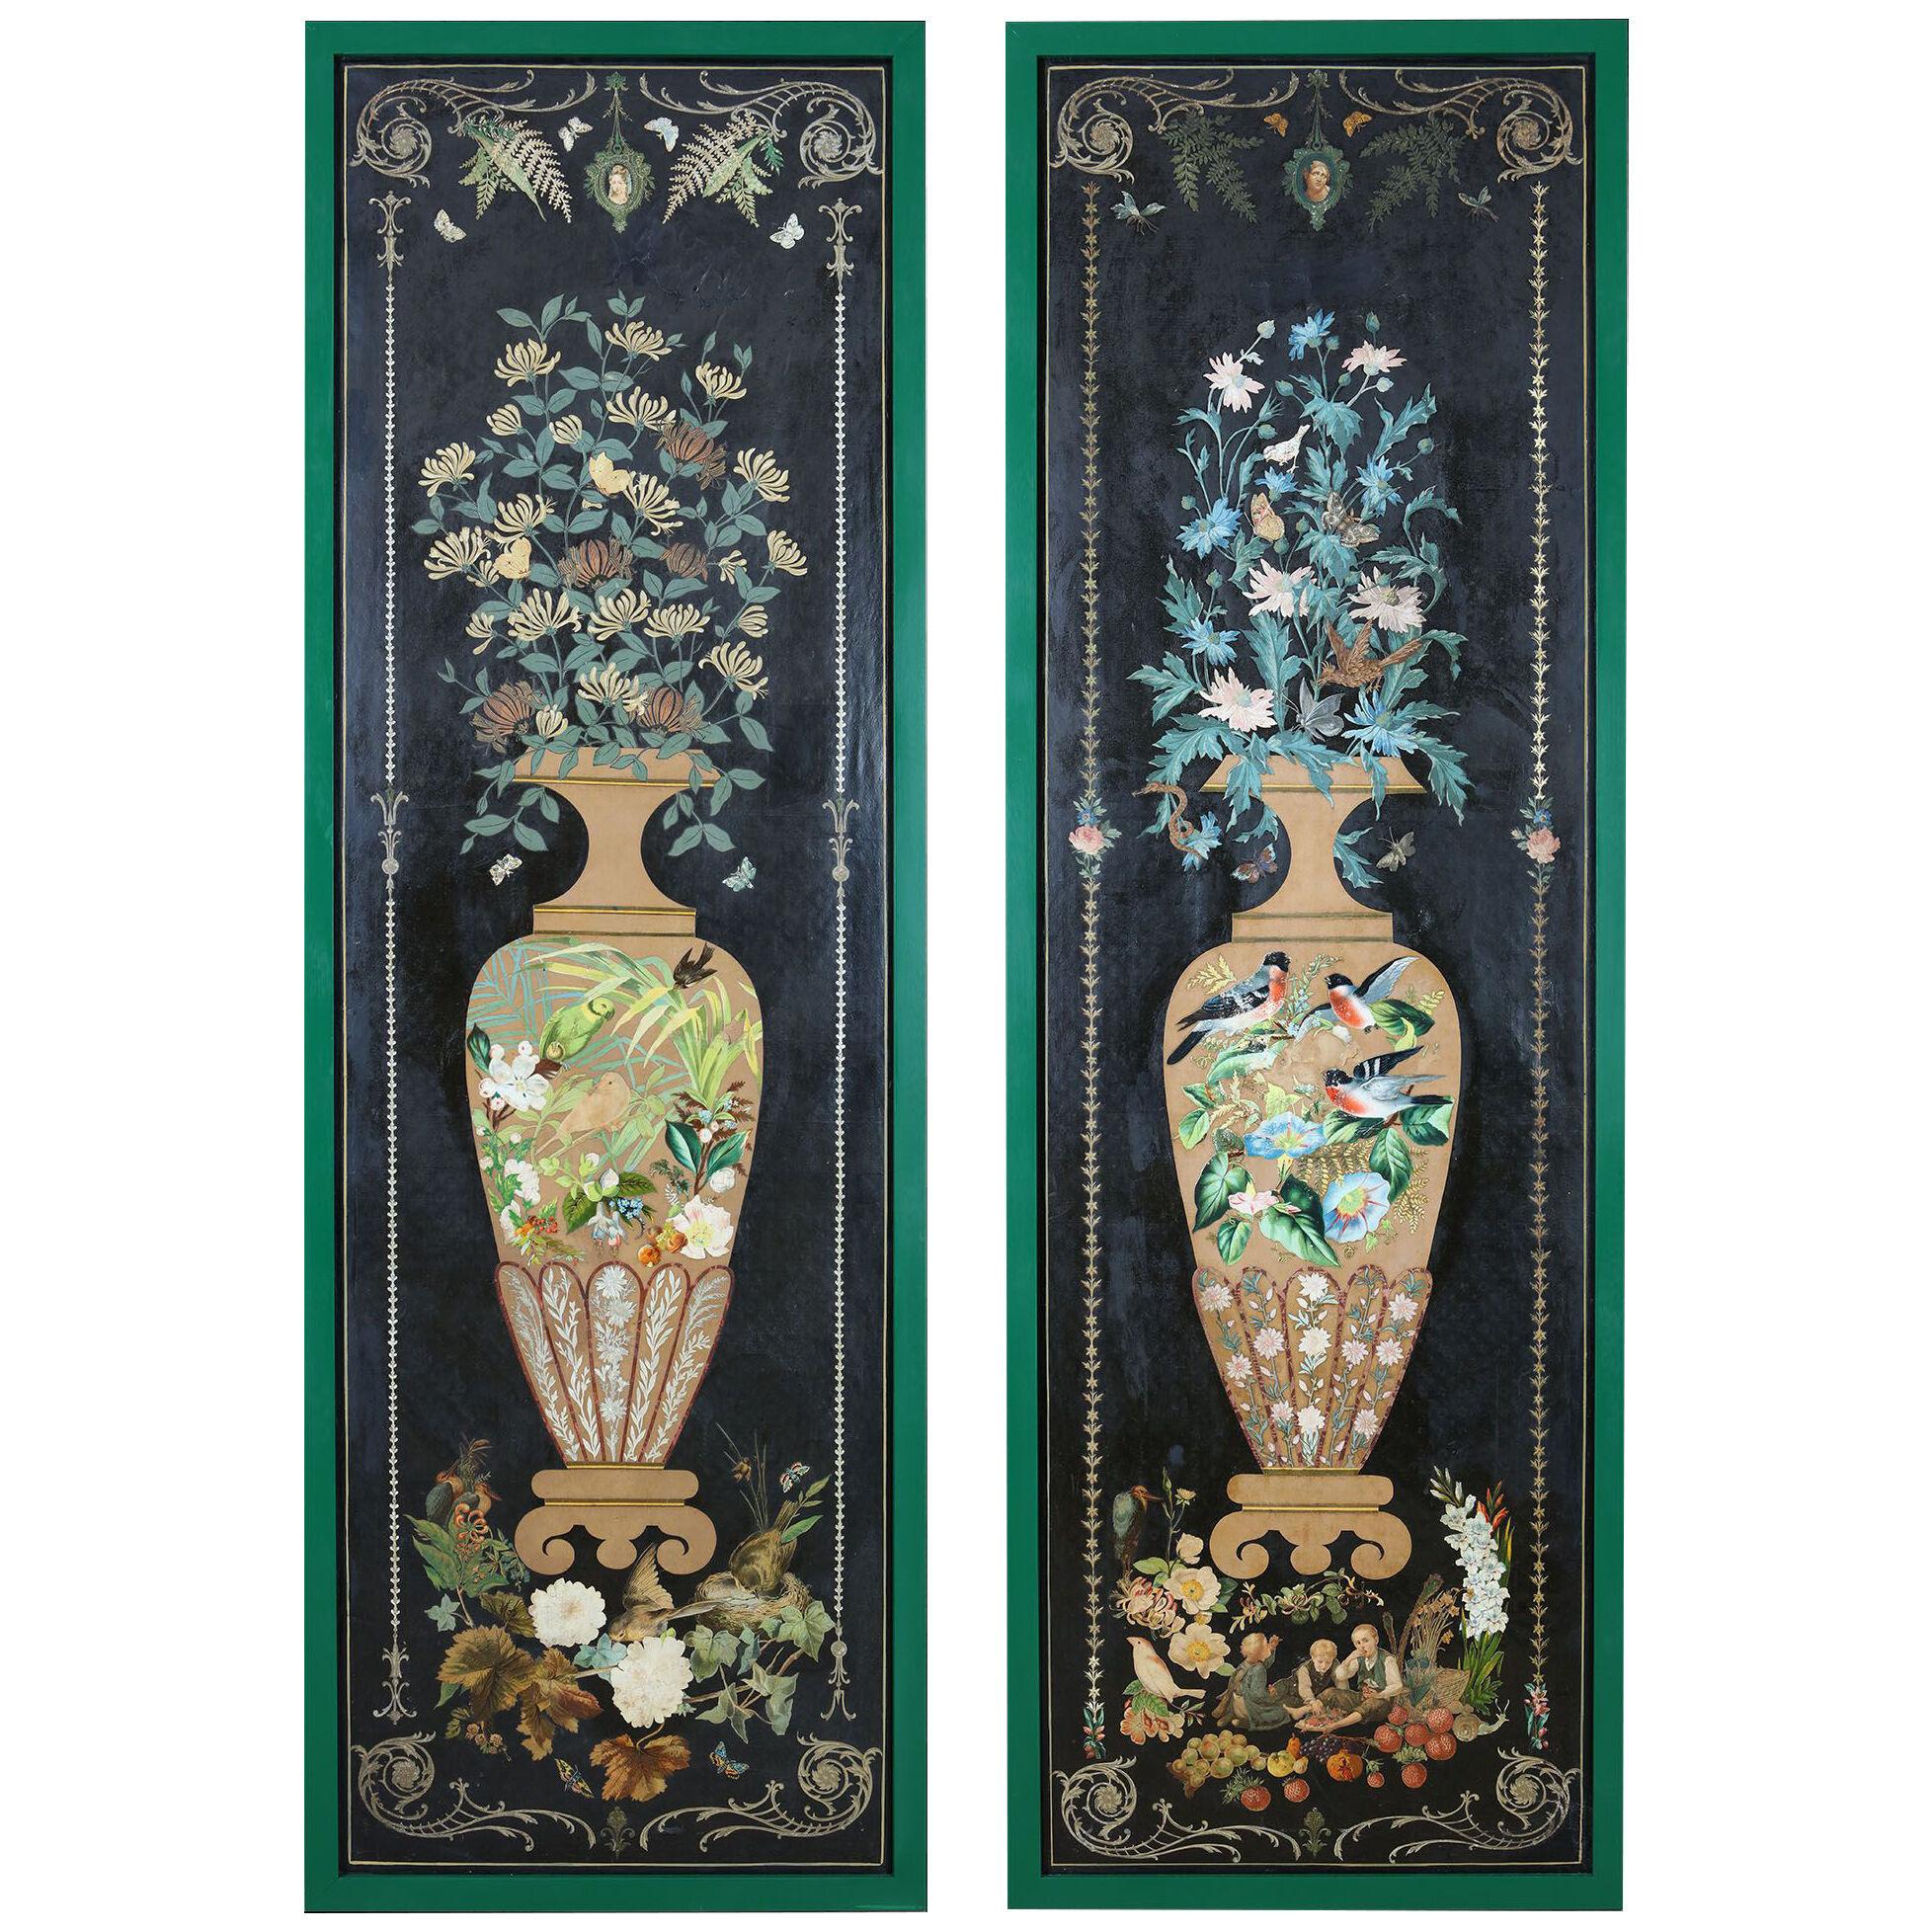 A pair of Victorian decoupage panels